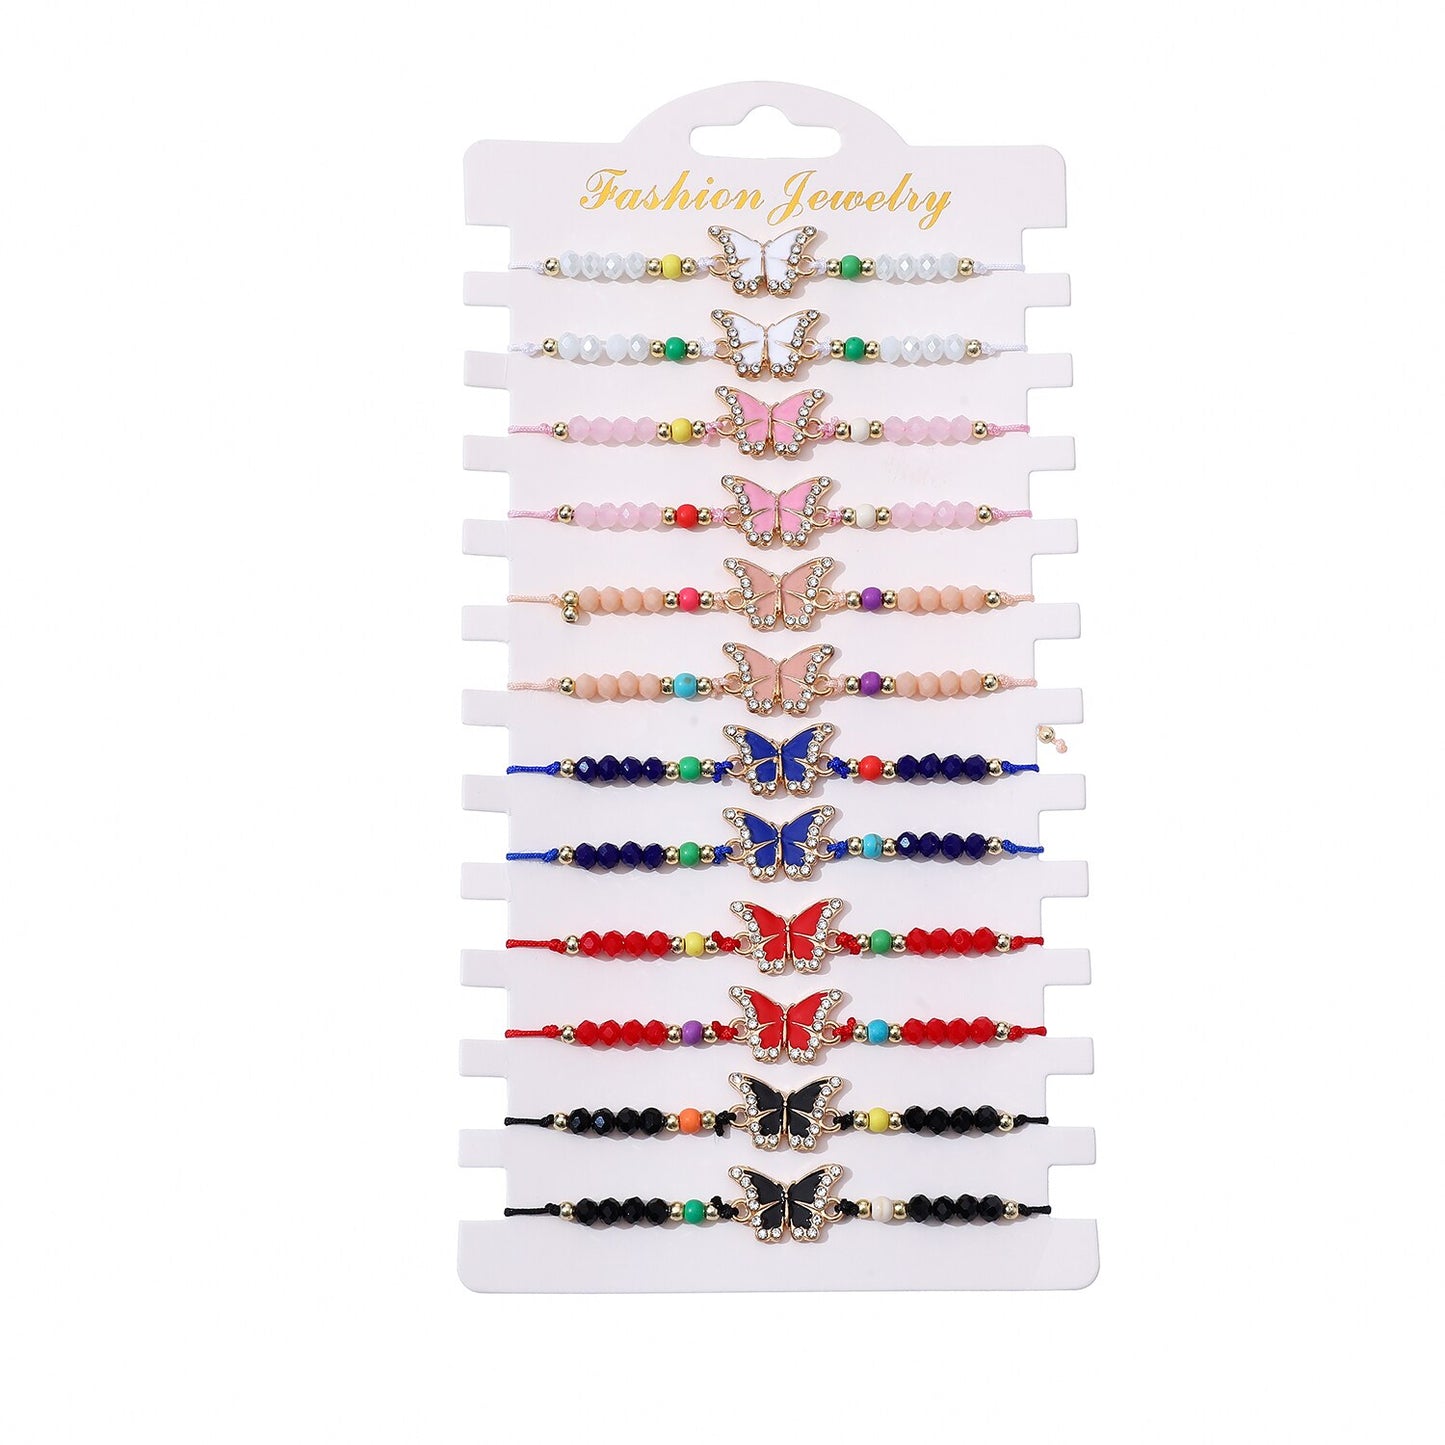 12 Pieces Colorful Crystal Beads Butterfly Pendant Charm Bracelet for Women Men Hand Woven Adjustable Chain Anklet Jewelry